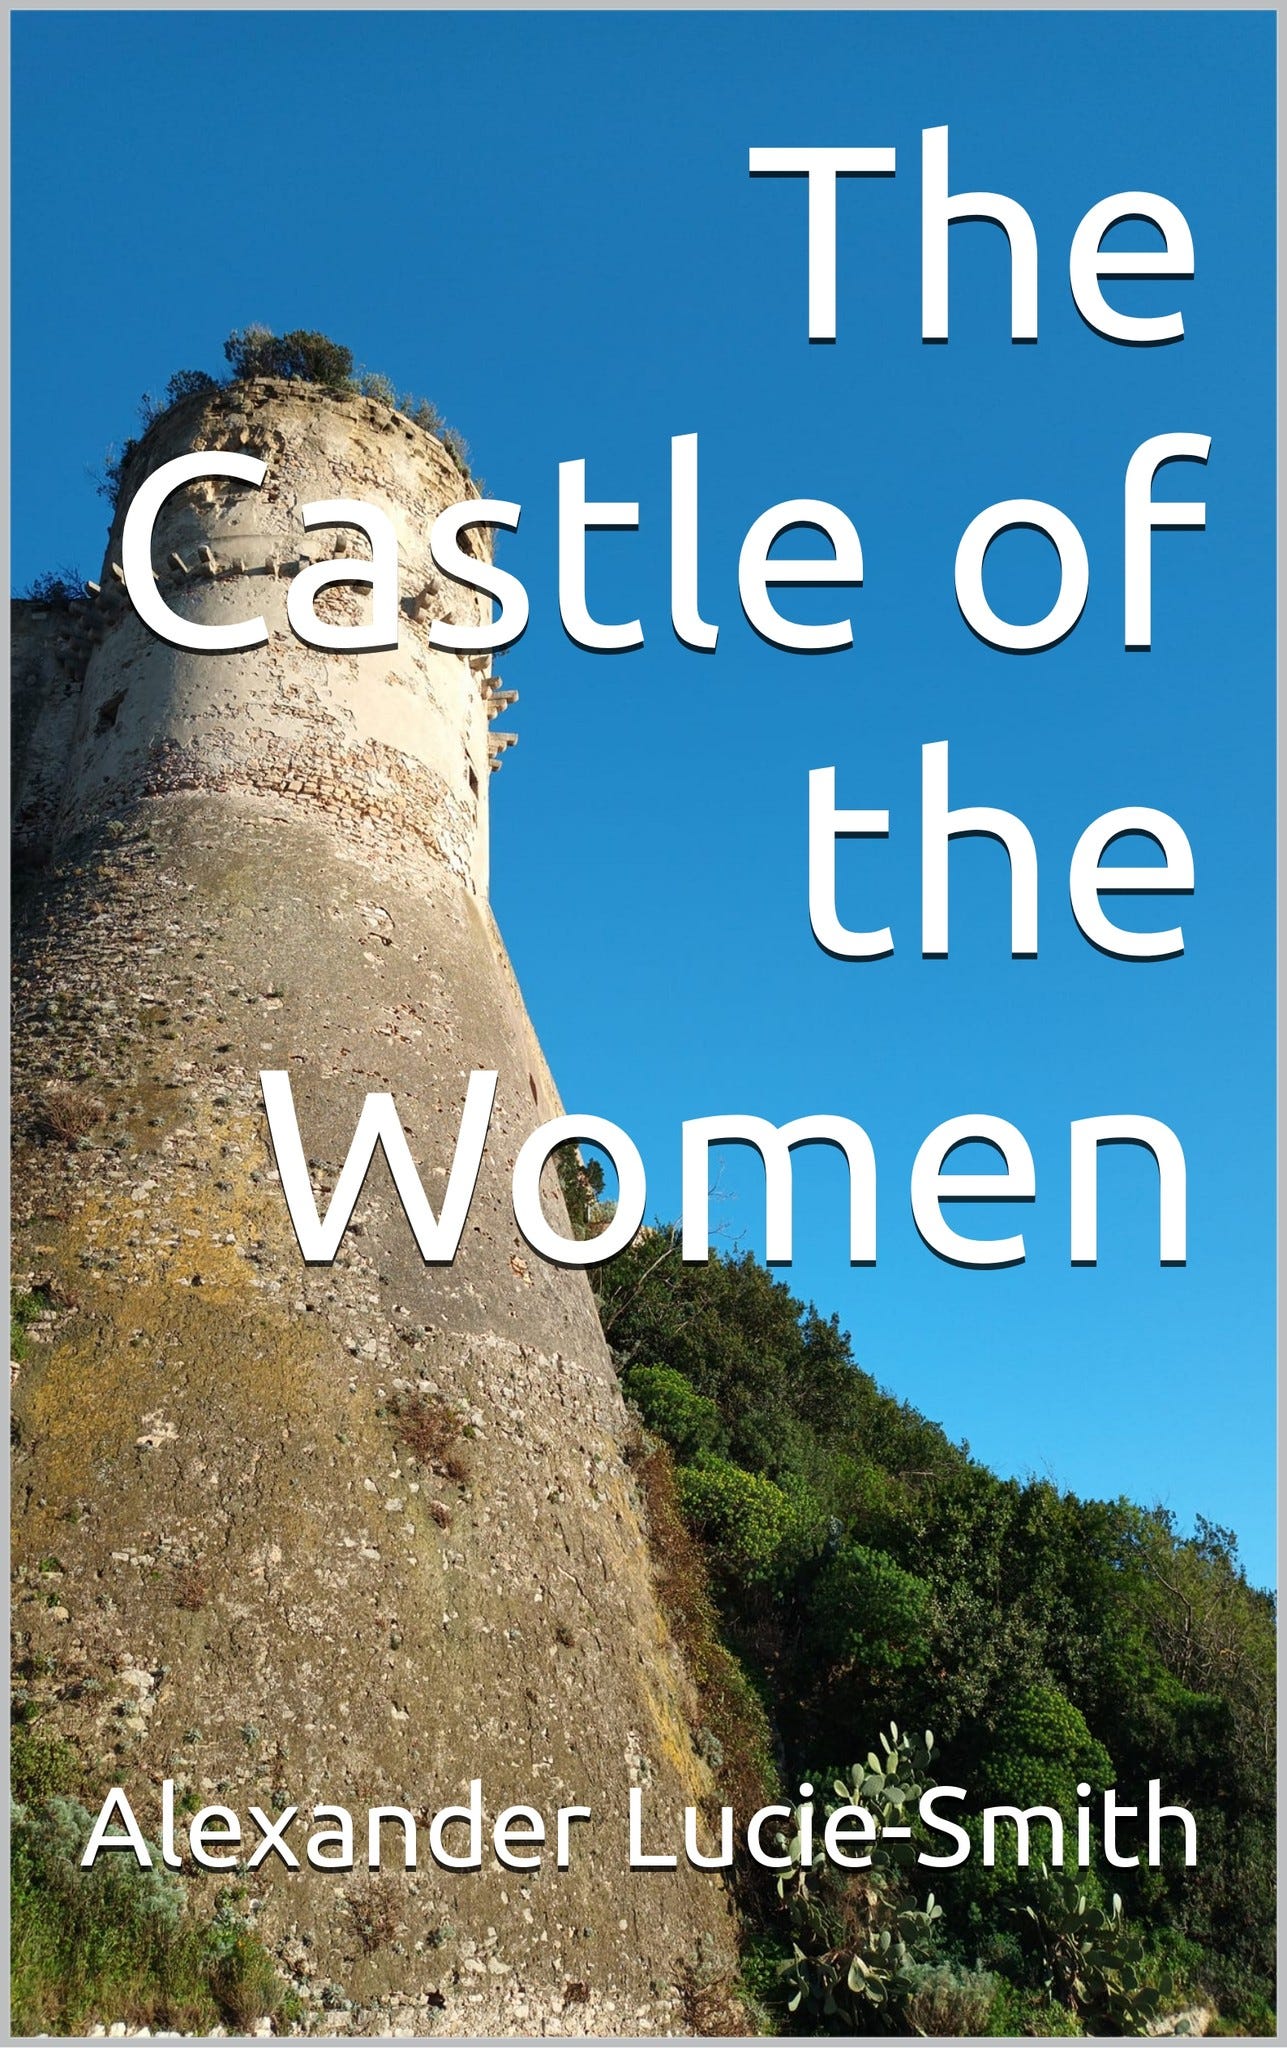 May be an image of text that says "The Castle of the Women Alexander Lucie- Smith"